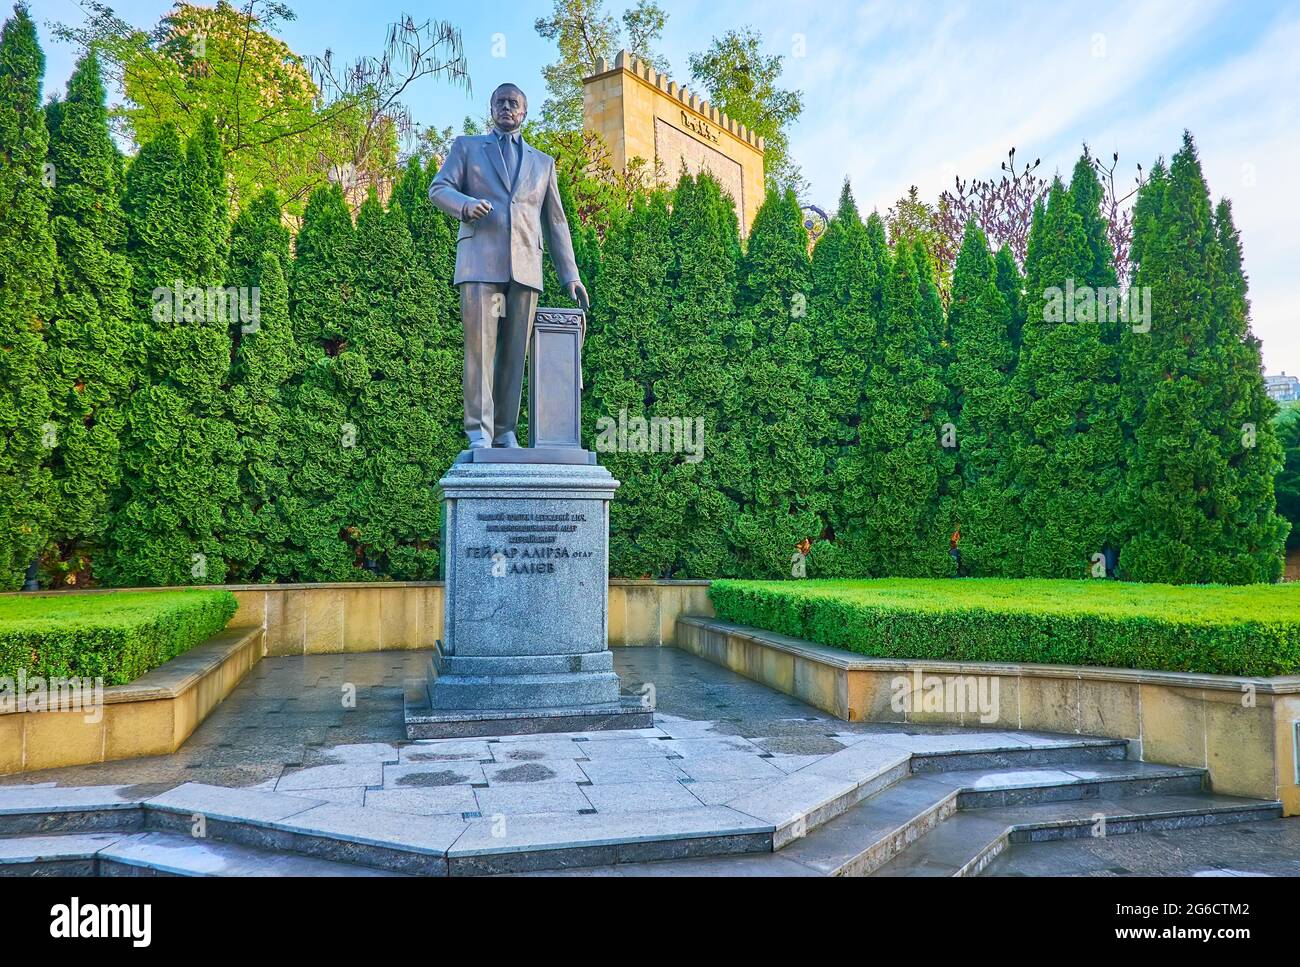 KYIV, UKRAINE - MAY 18, 2021: The monument to Heydar Aliyev in park with lush thuja trees in background, on May 18 in Kyiv Stock Photo